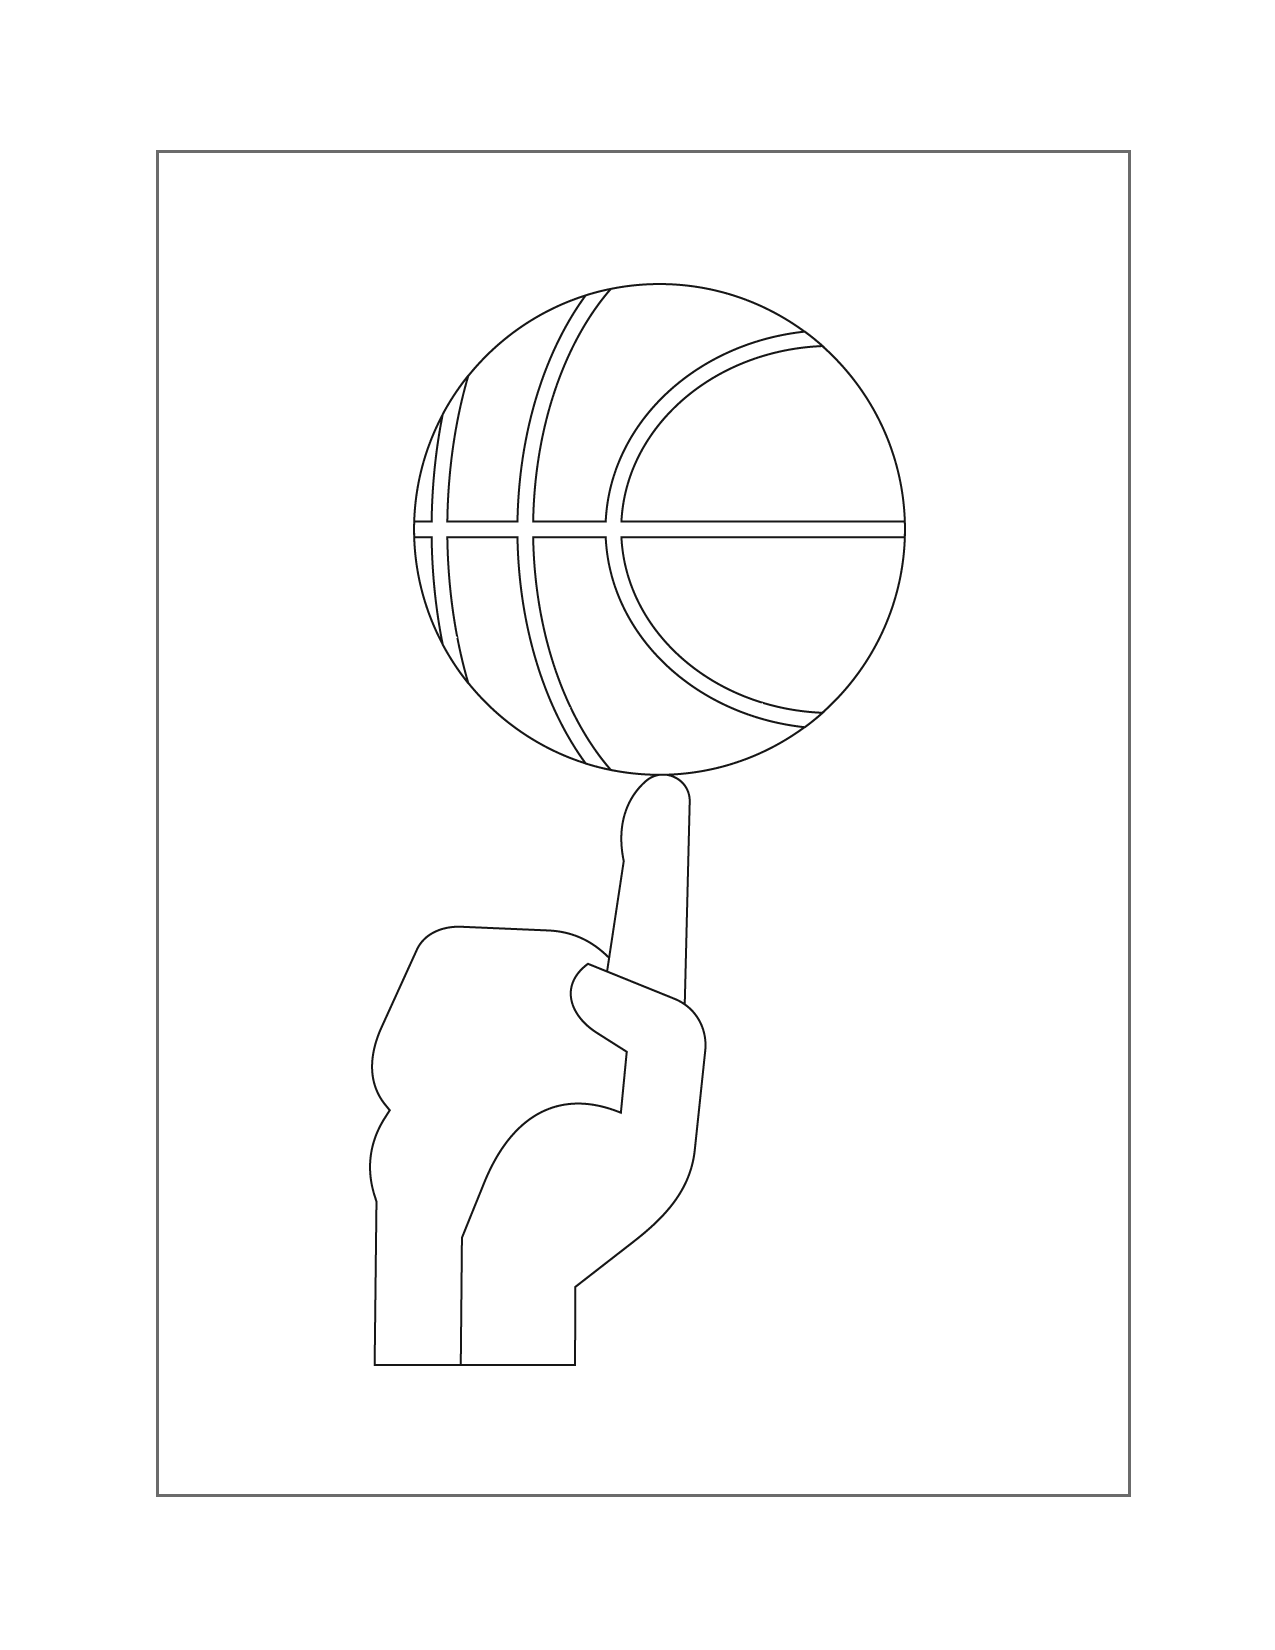 Spinning Basketball On Finger Coloring Page